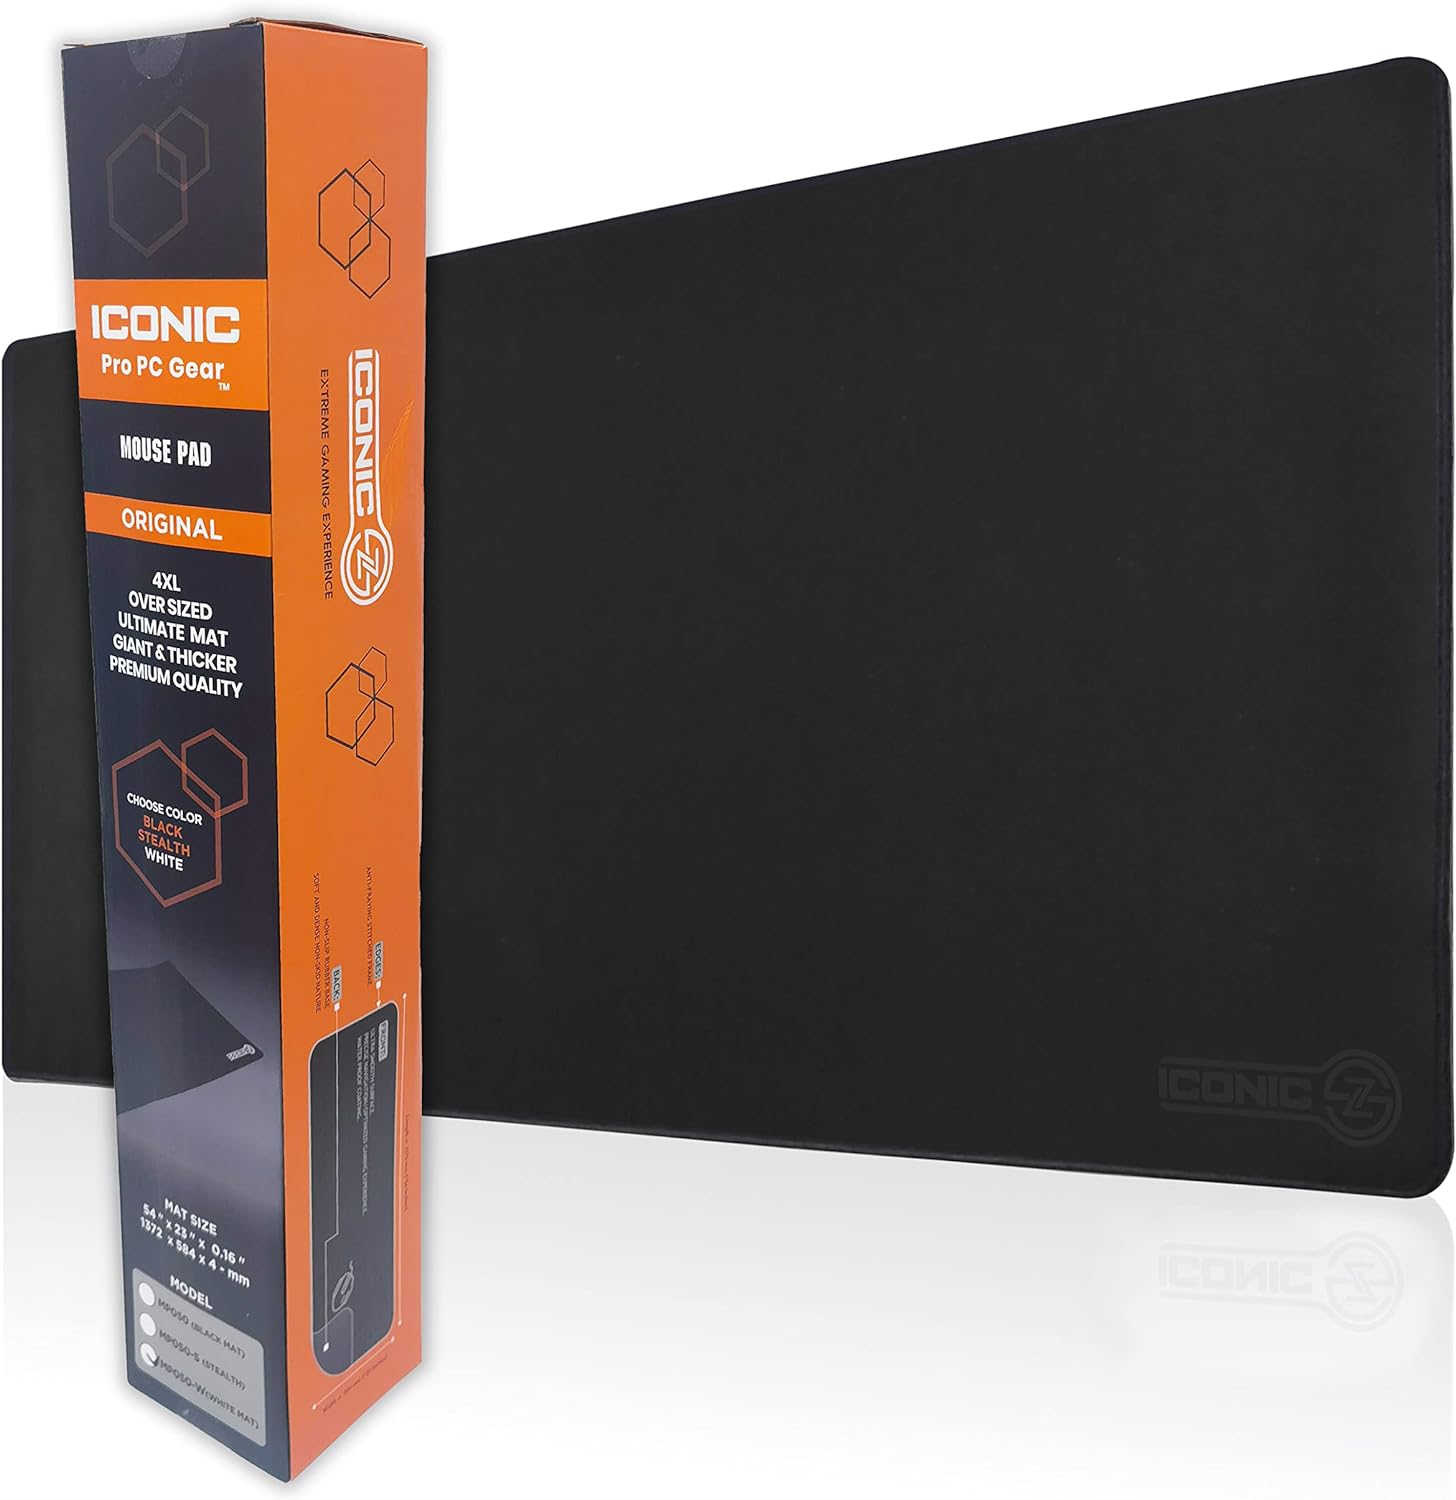 ICONIC - PRO PC GEAR 4XL Oversized & Ultimate Gaming Desk Mat 54x23(Stealth) - Giant & Thicker 4mm - Stitched/Water Proof/Non Slip Base